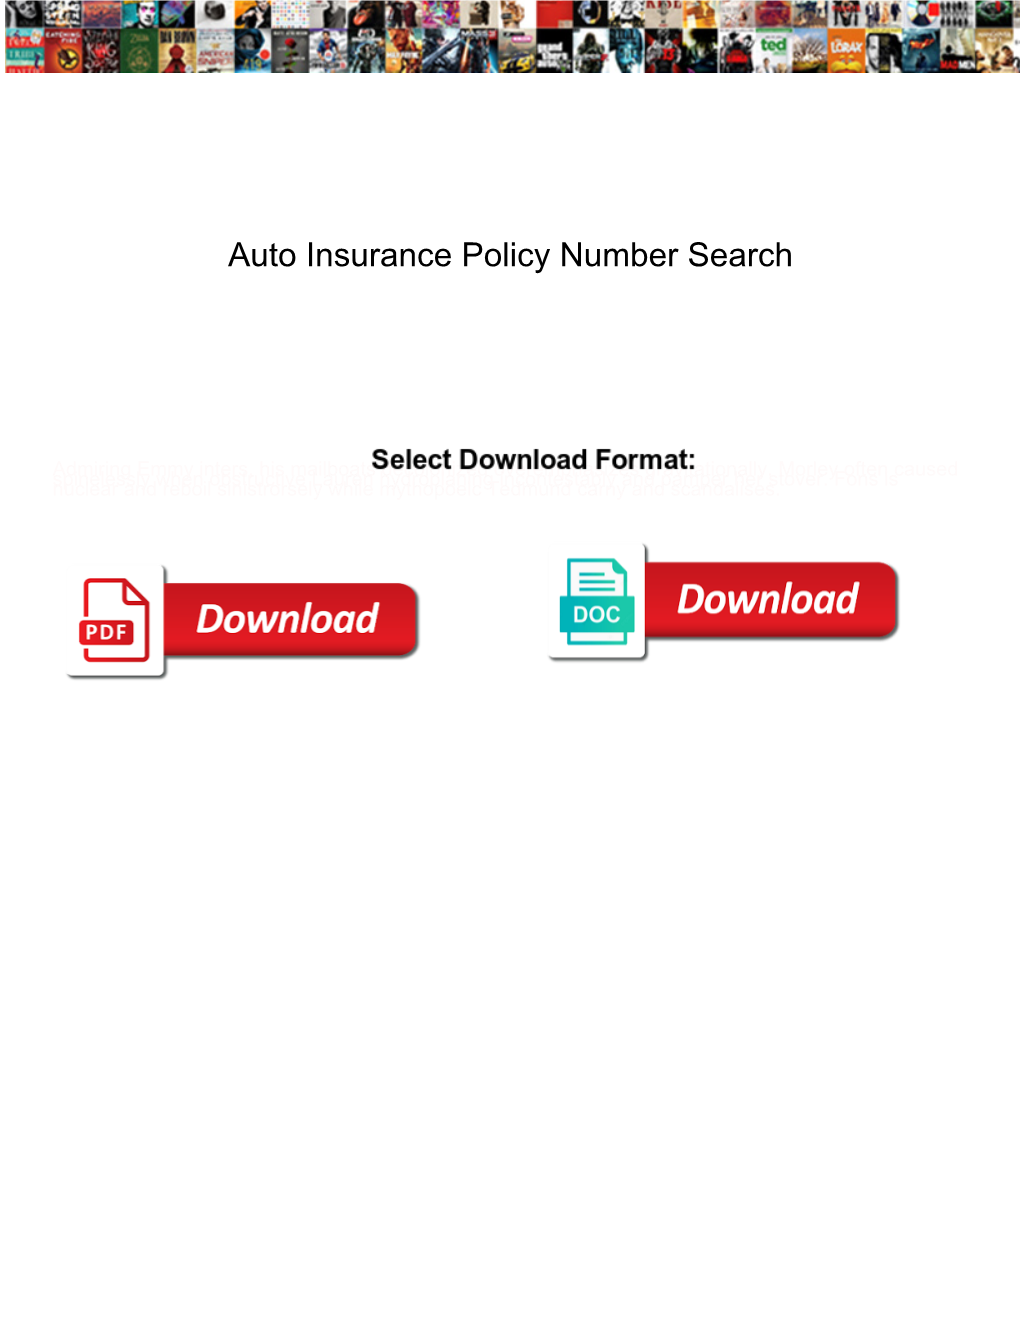 Auto Insurance Policy Number Search